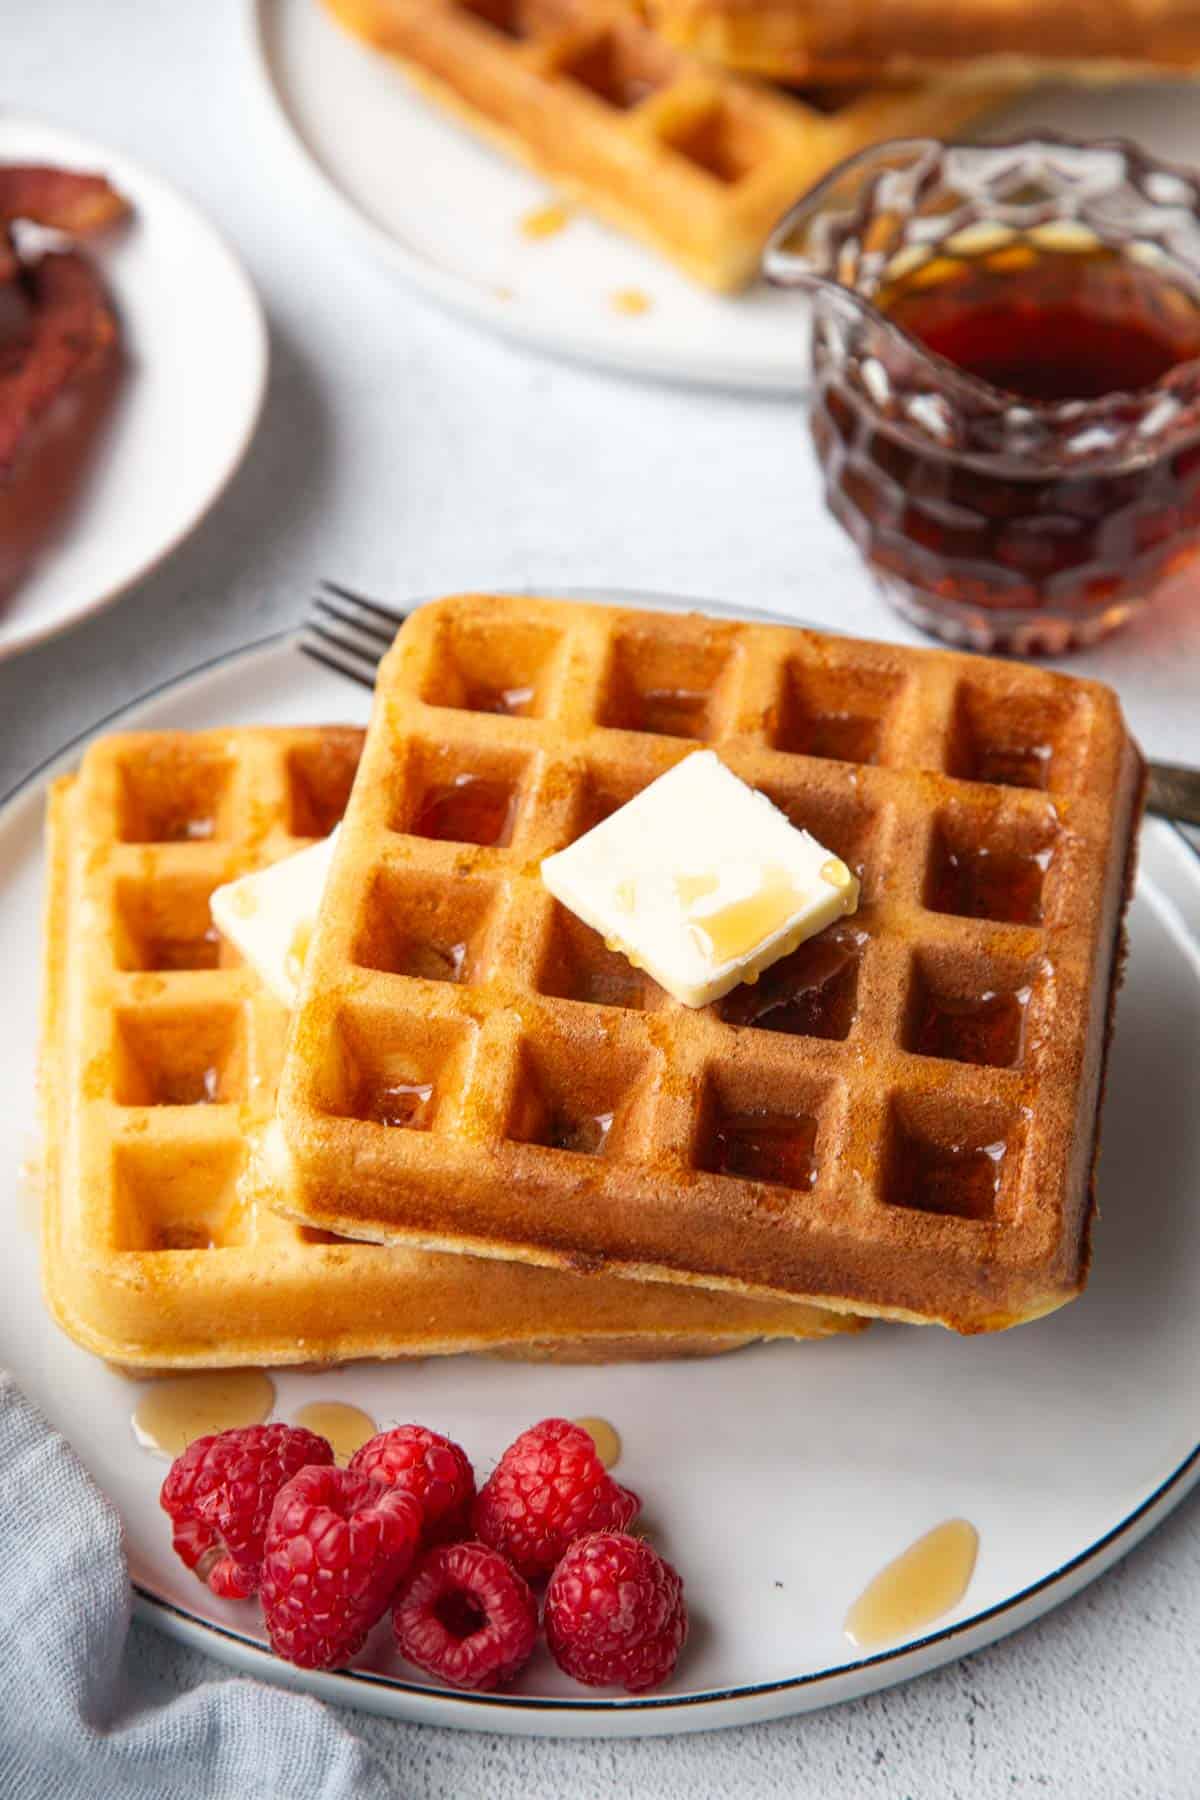 square belgian waffles with butter and syrup on a plate with raspberries.